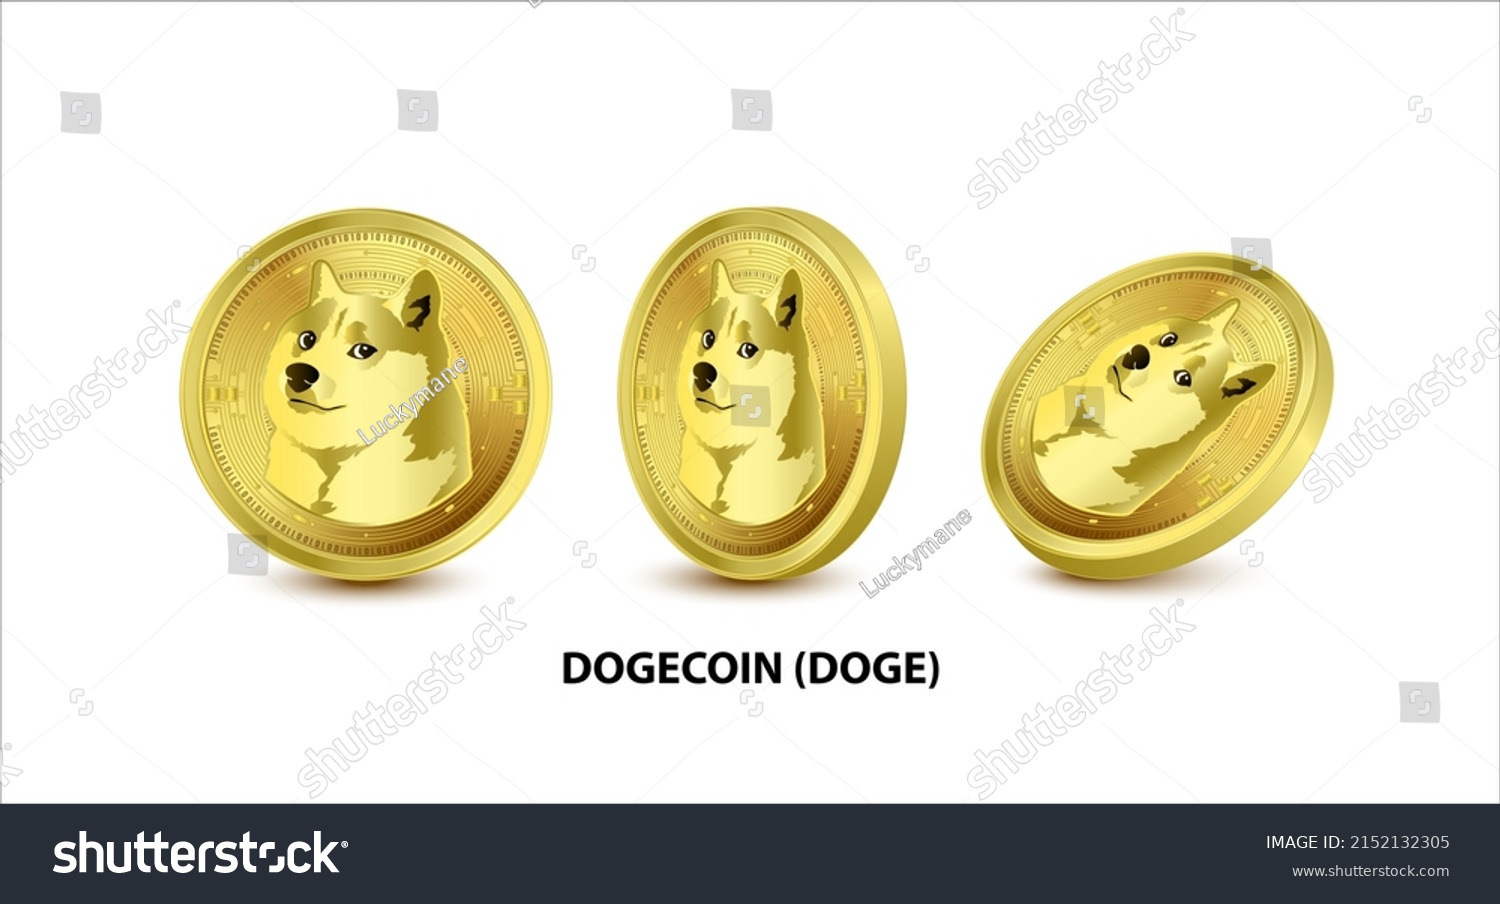 SVG of Set of Gold Dogecoin (DOGE) Vector illustration. Digital currency. Cryptocurrency. Golden coins with bitcoin, ripple and ethereum symbol isolated on white background. 3D isometric Physical coins. svg